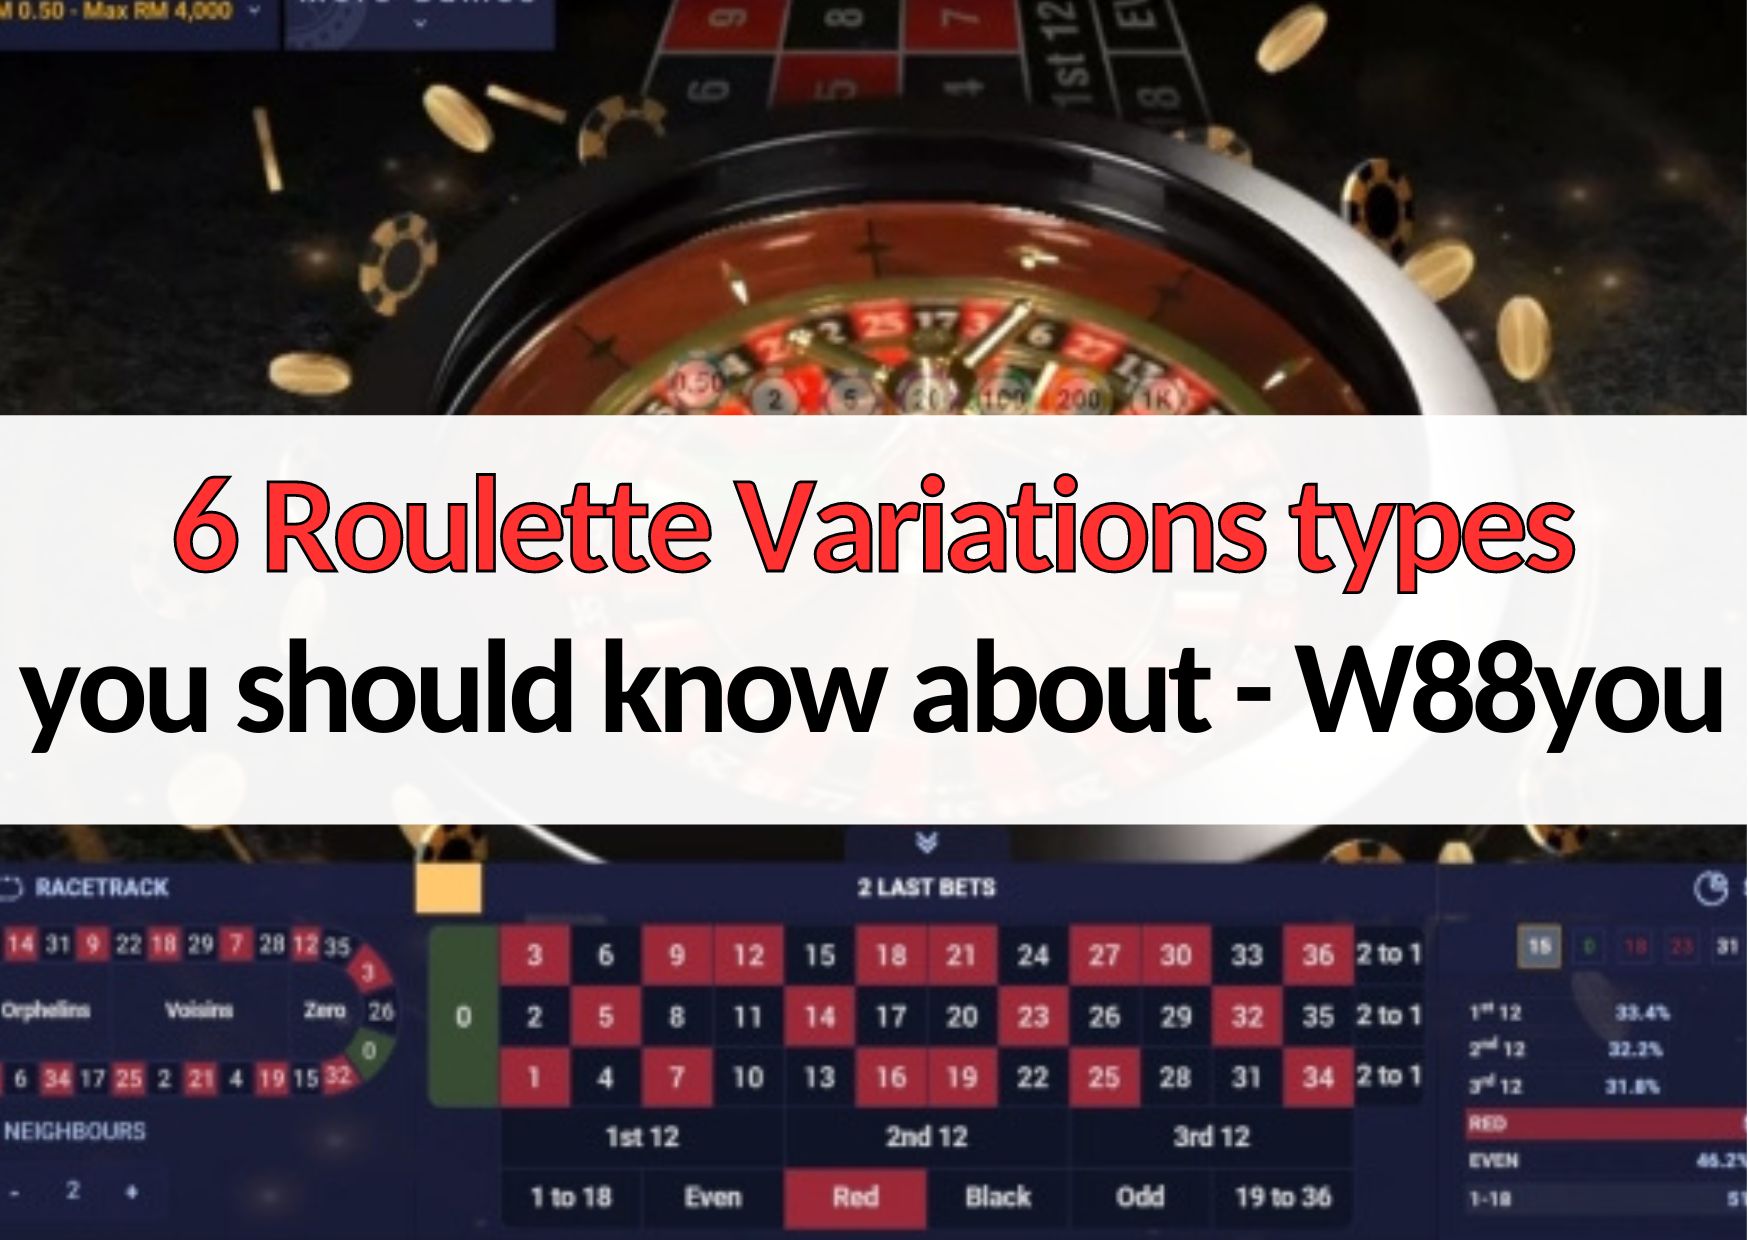 w888you 6 roulette variation types